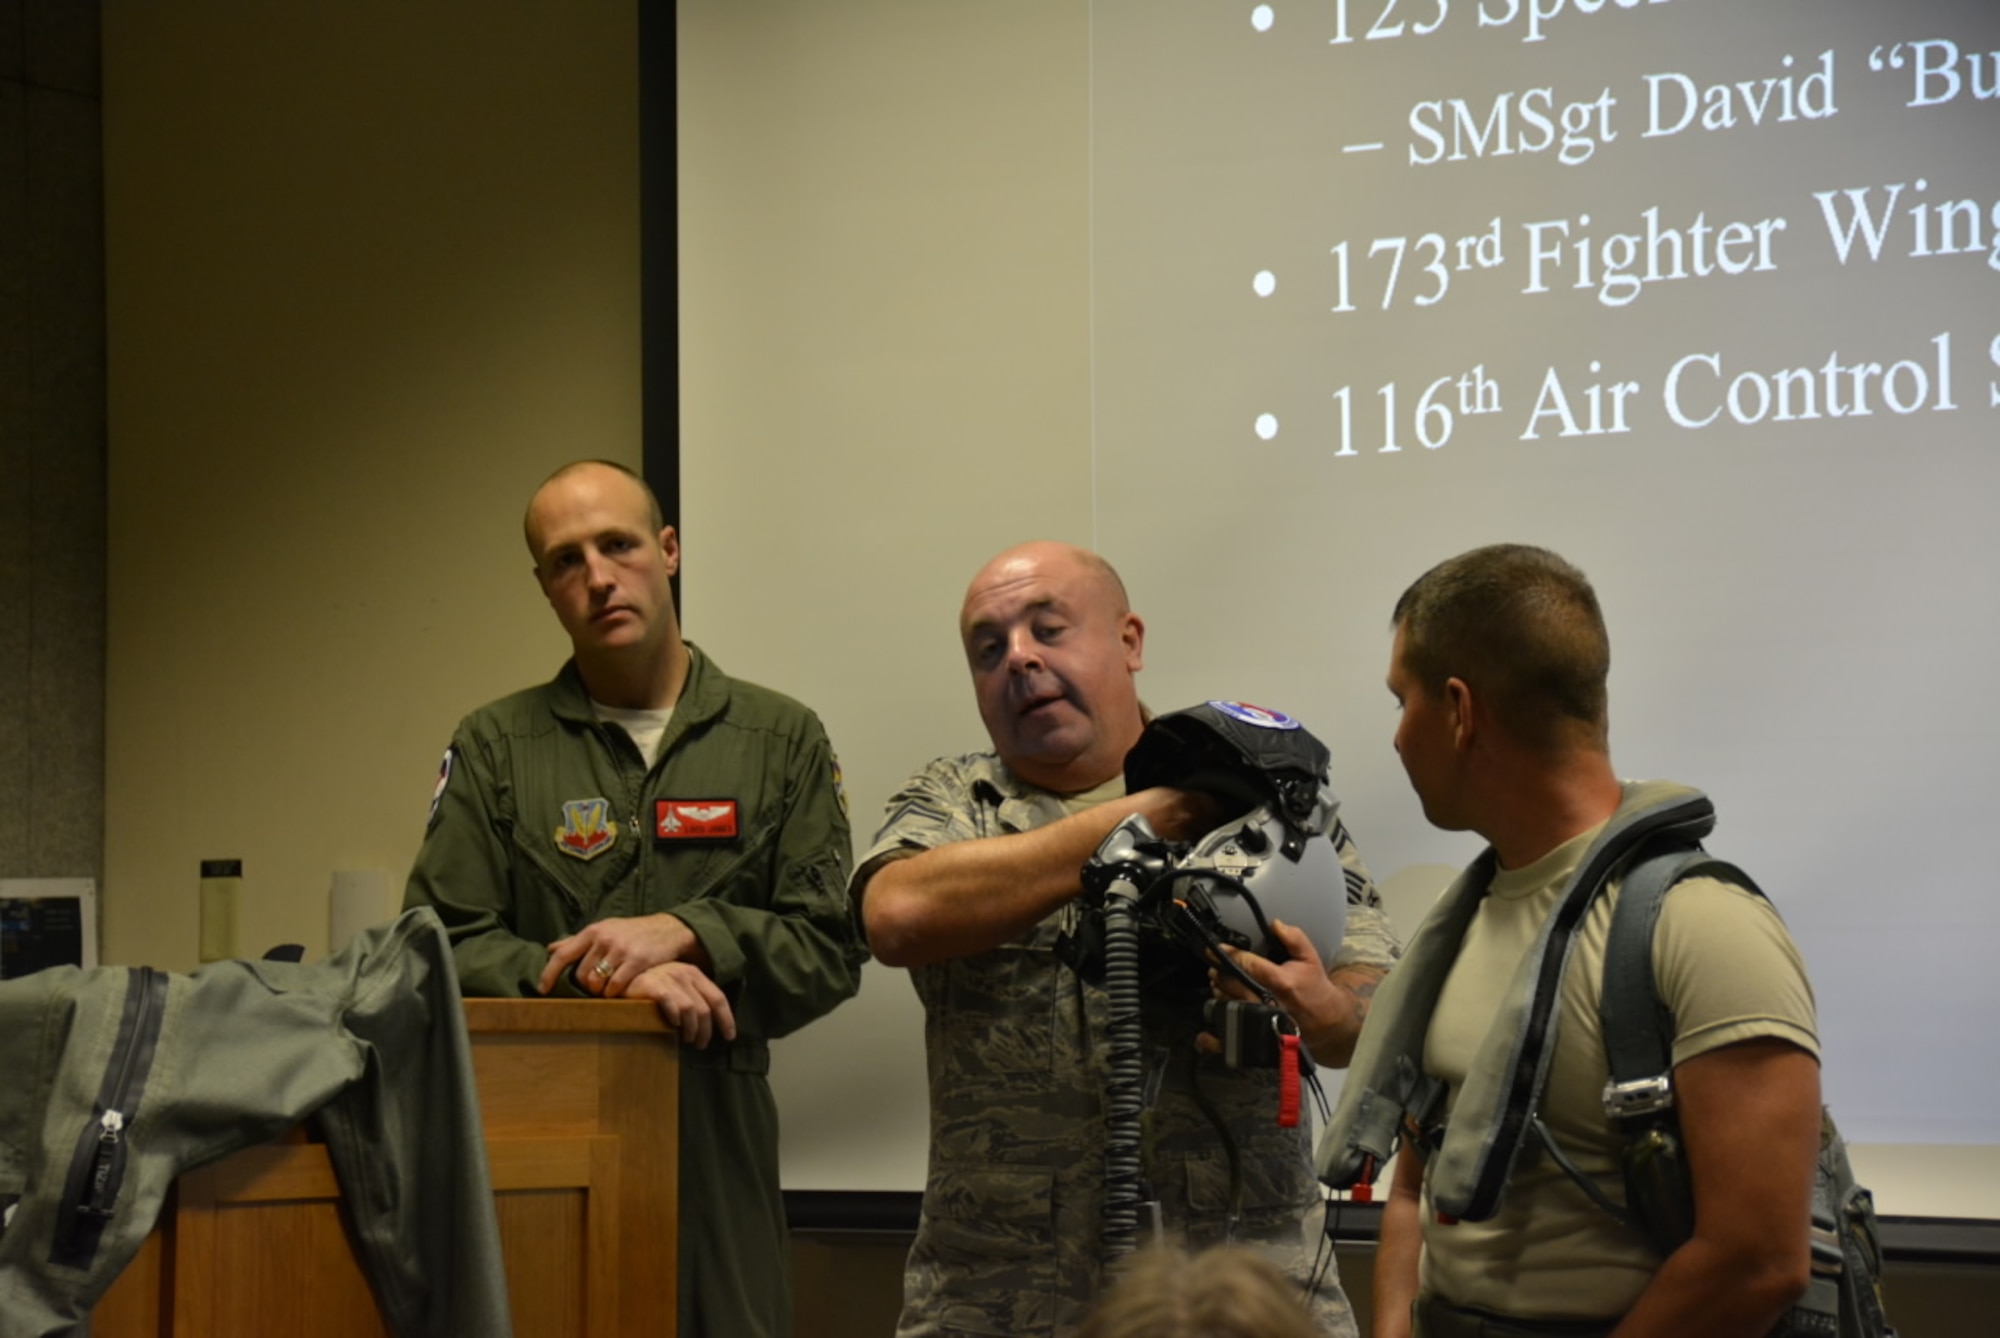 Members of the Oregon Air National Guard present a 142nd Fighter wing mission briefing and demonstrate life support equipment to the members of the visiting 381st Bomb Group (H) Memorial Association at Portland Air National Guard Base on Sept. 4, 2014.  Left to right are Capt. Robert Jones, Senior Master Sgt. David West and Tech. Sgt. Nathan Ruddell.  (Courtesy Dr. Kevin Wilson, 381BGMA Secretary-Treasurer/Historian)